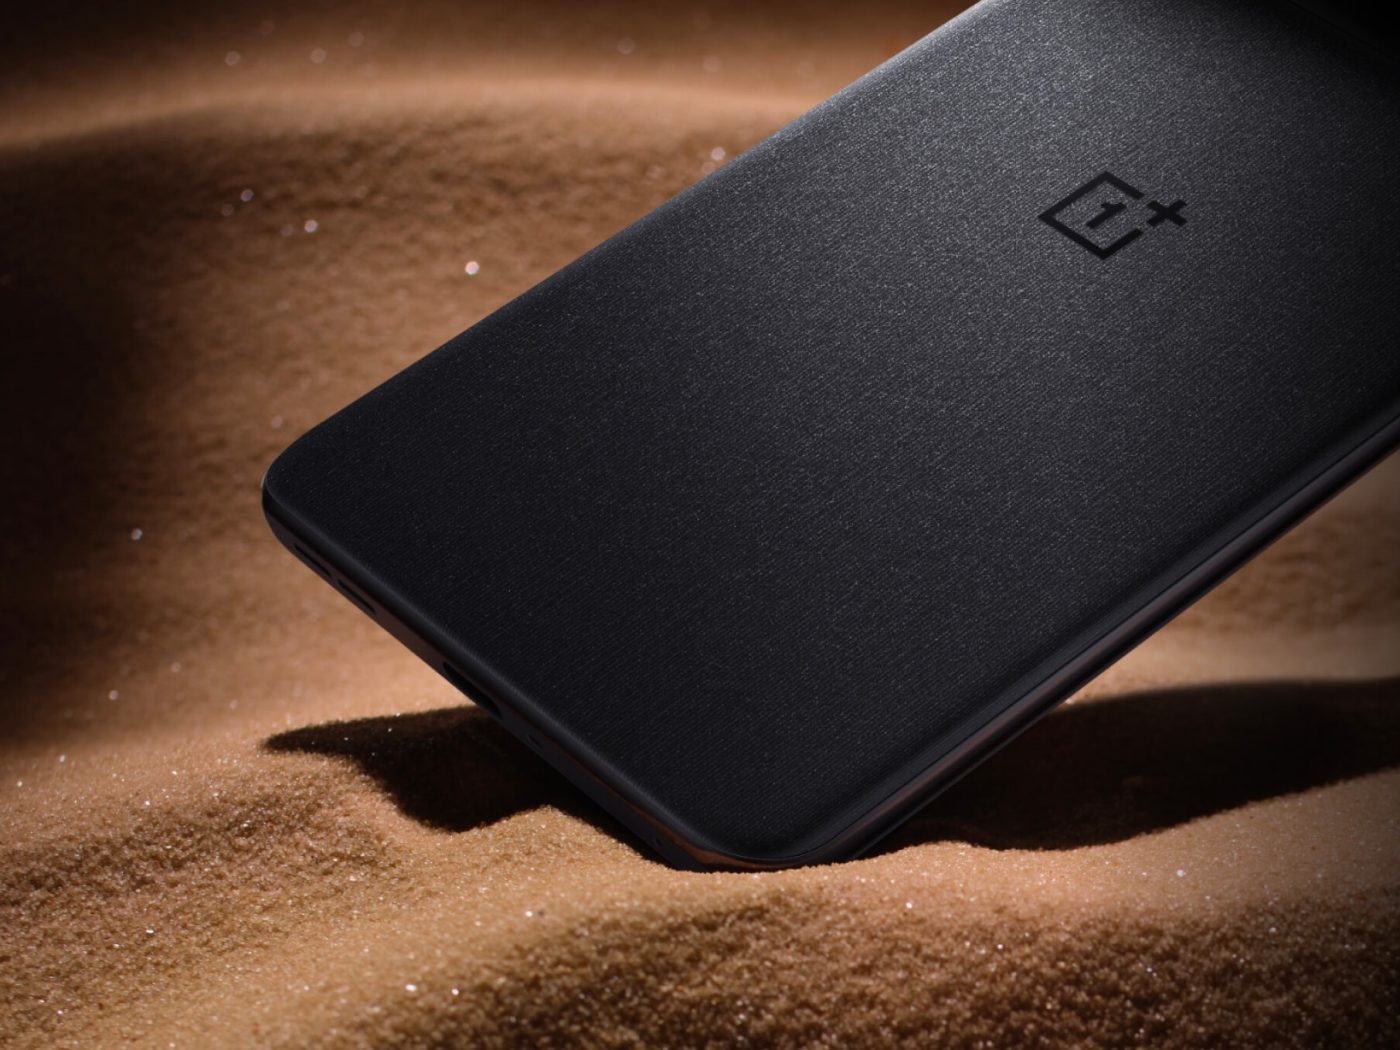 The OnePlus 10T 5G will be unveiled on August 3rd